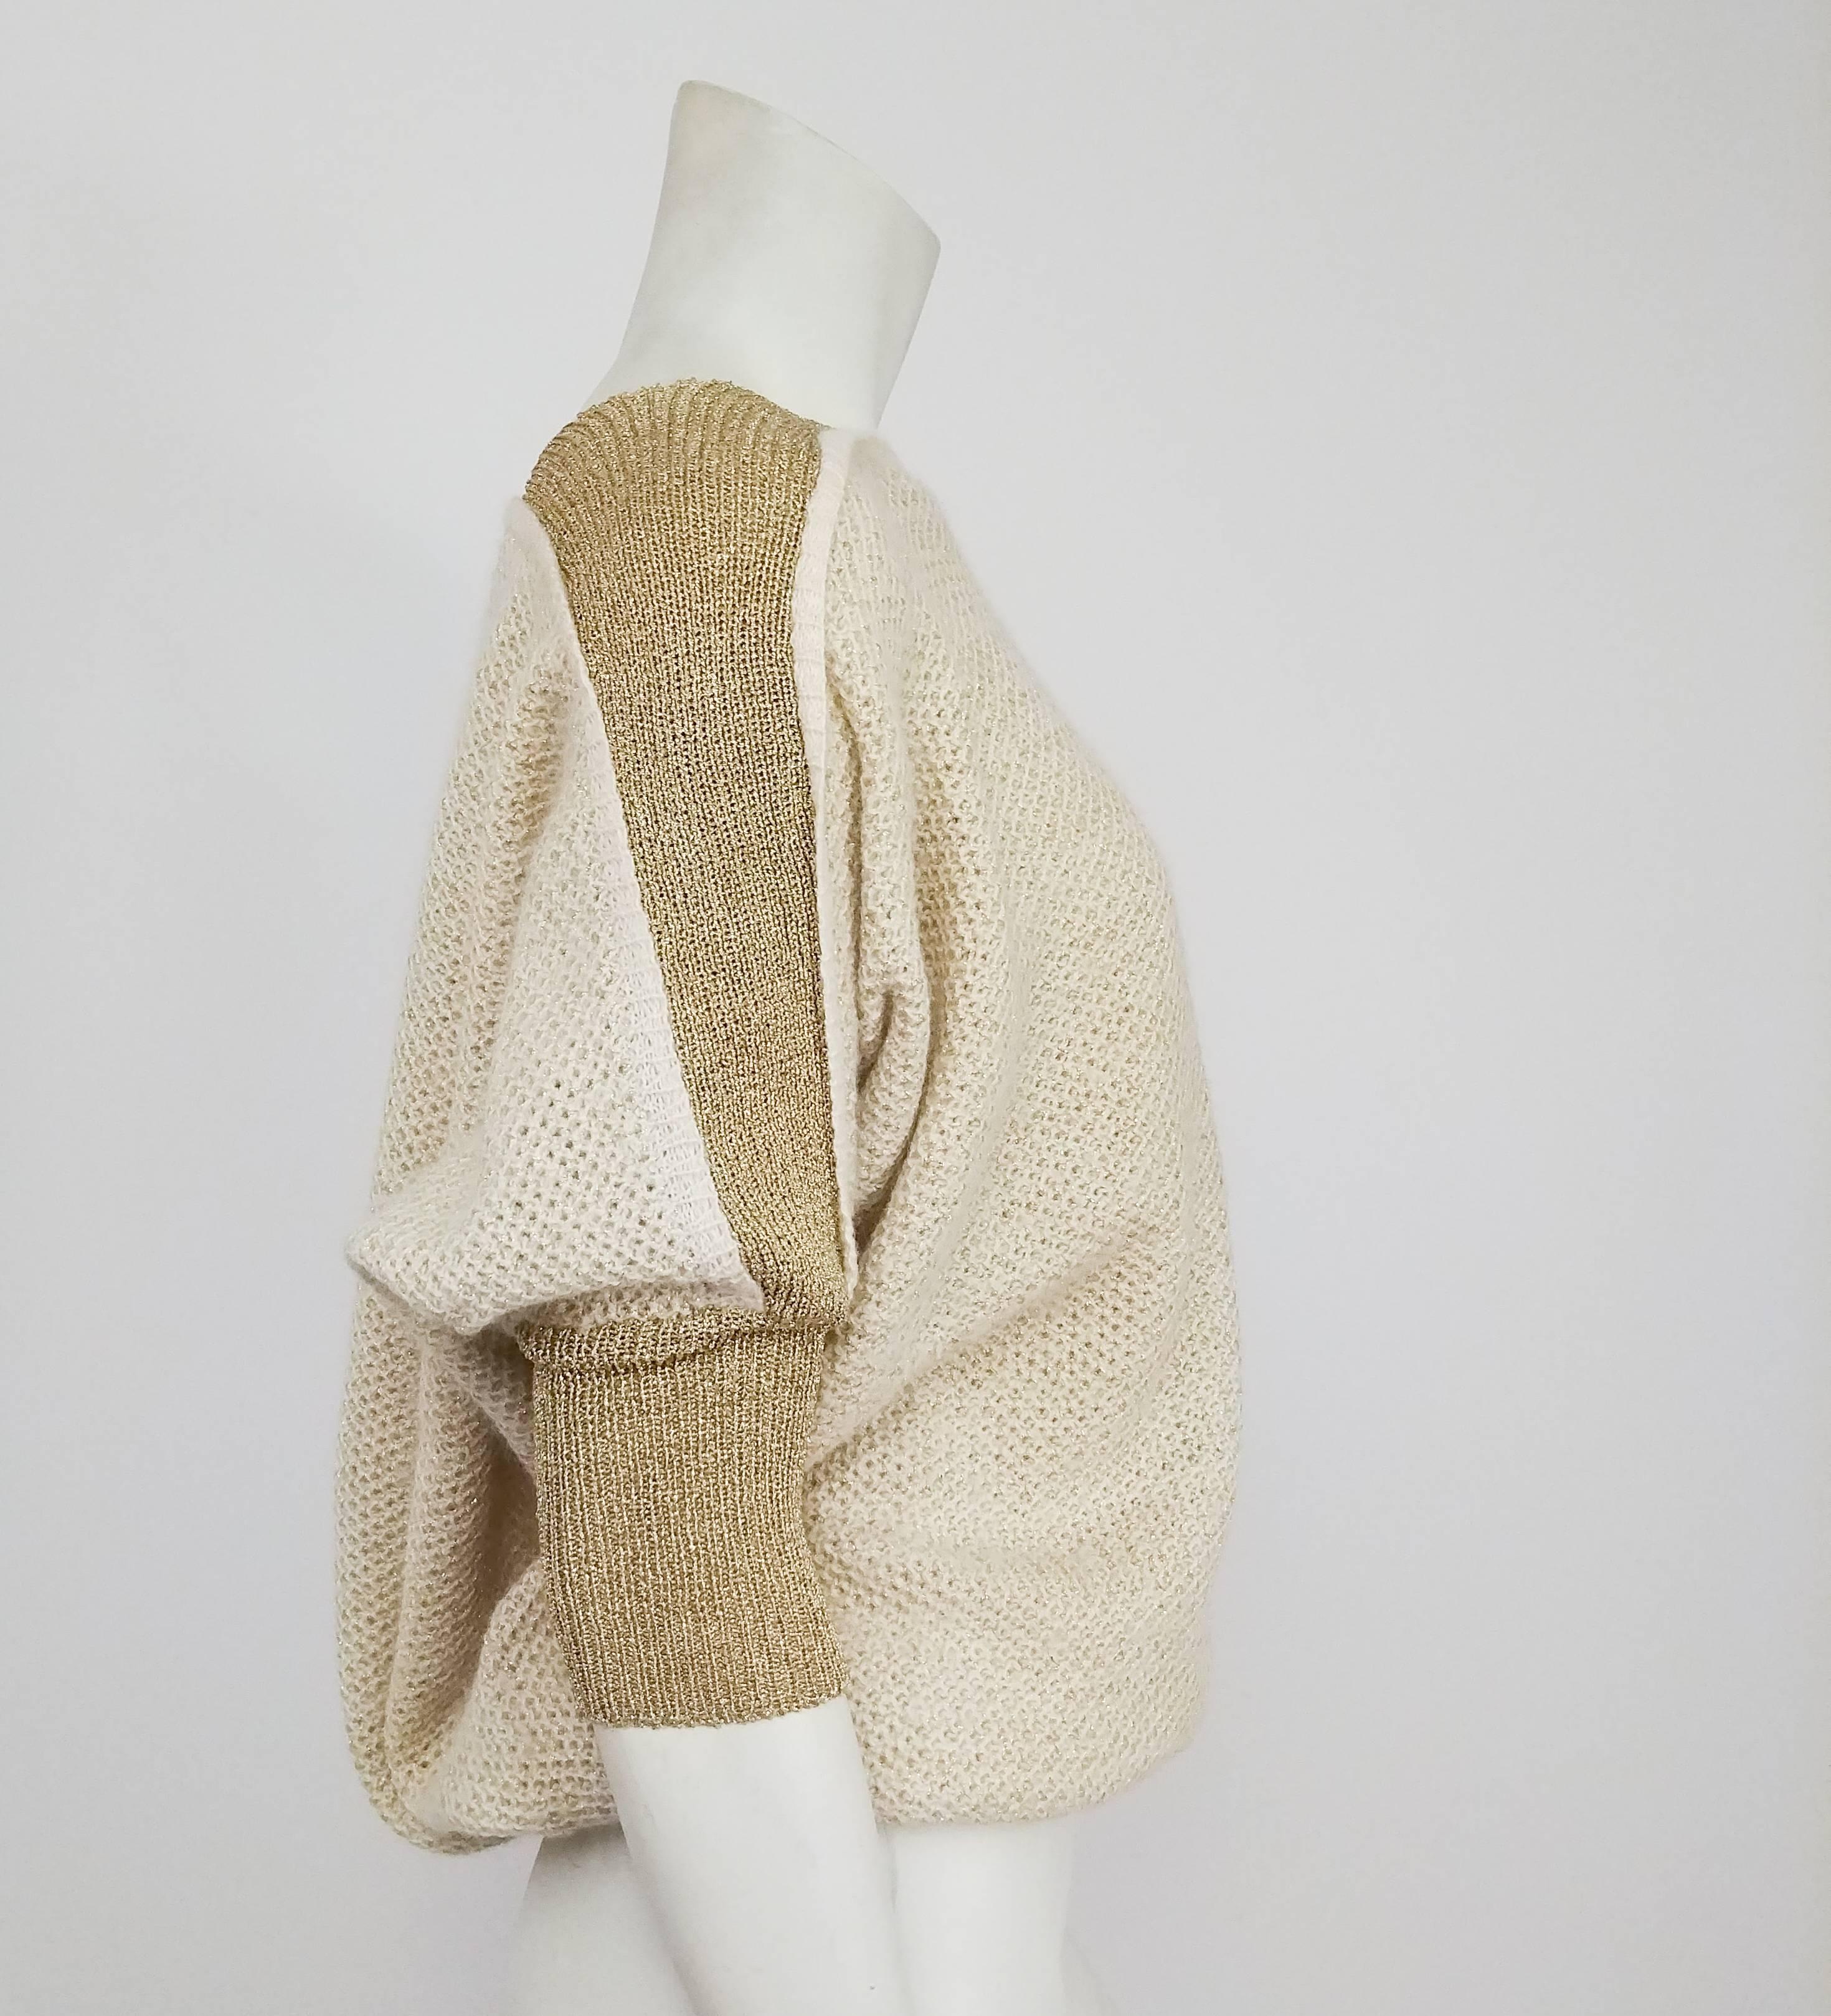 1970s Cream & Gold Batwing Sweater. Metallic gold striped down shoulders & ribbed sleeves.